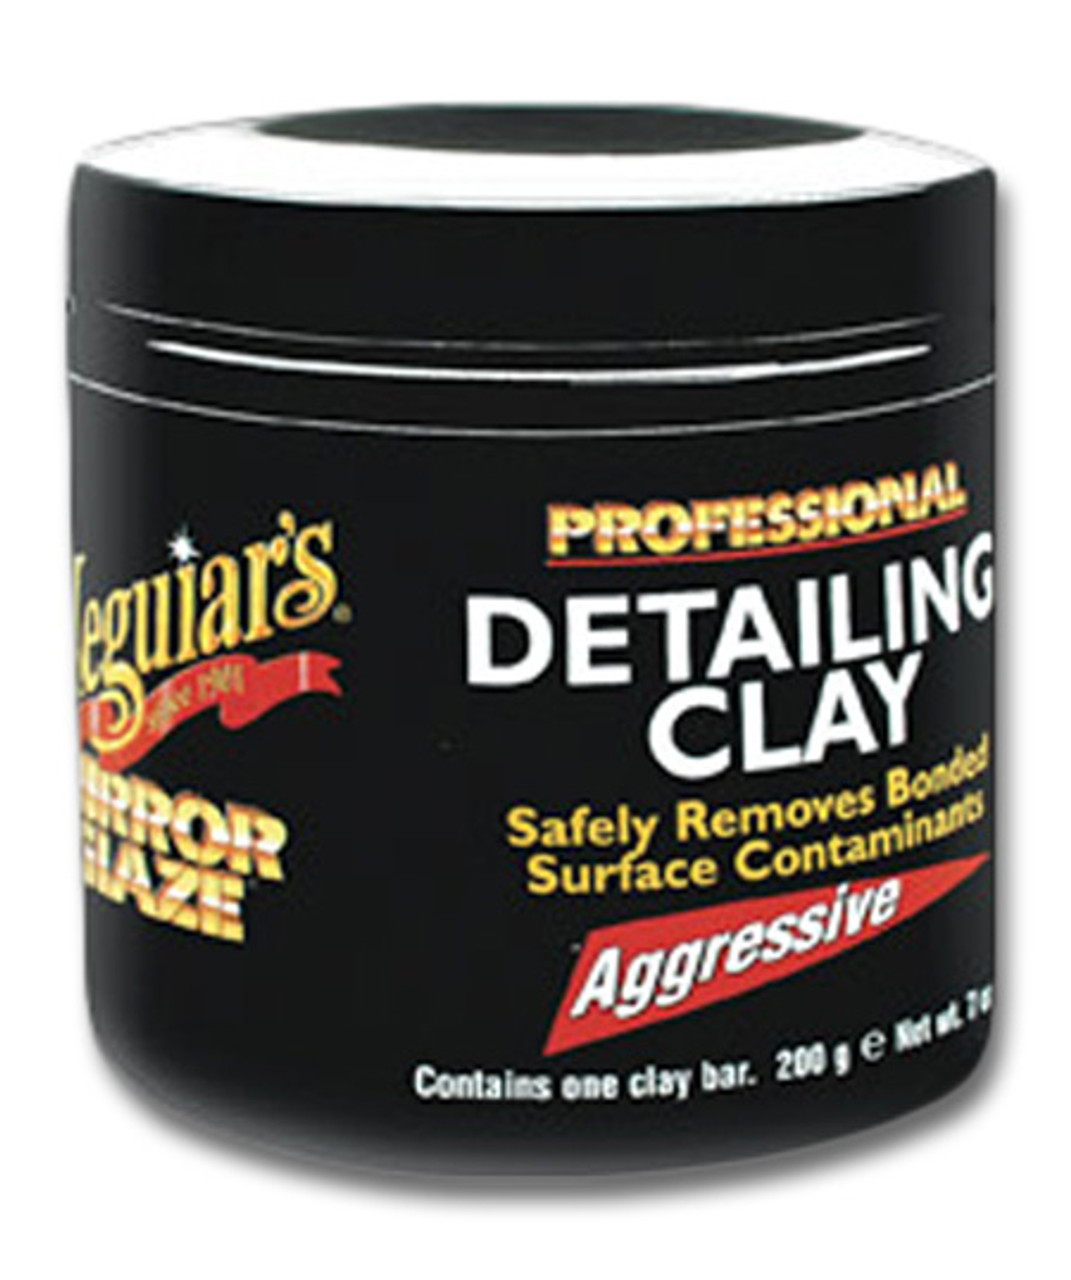 Pinnacles Ultra Poly Clay is the single finest detailing clay